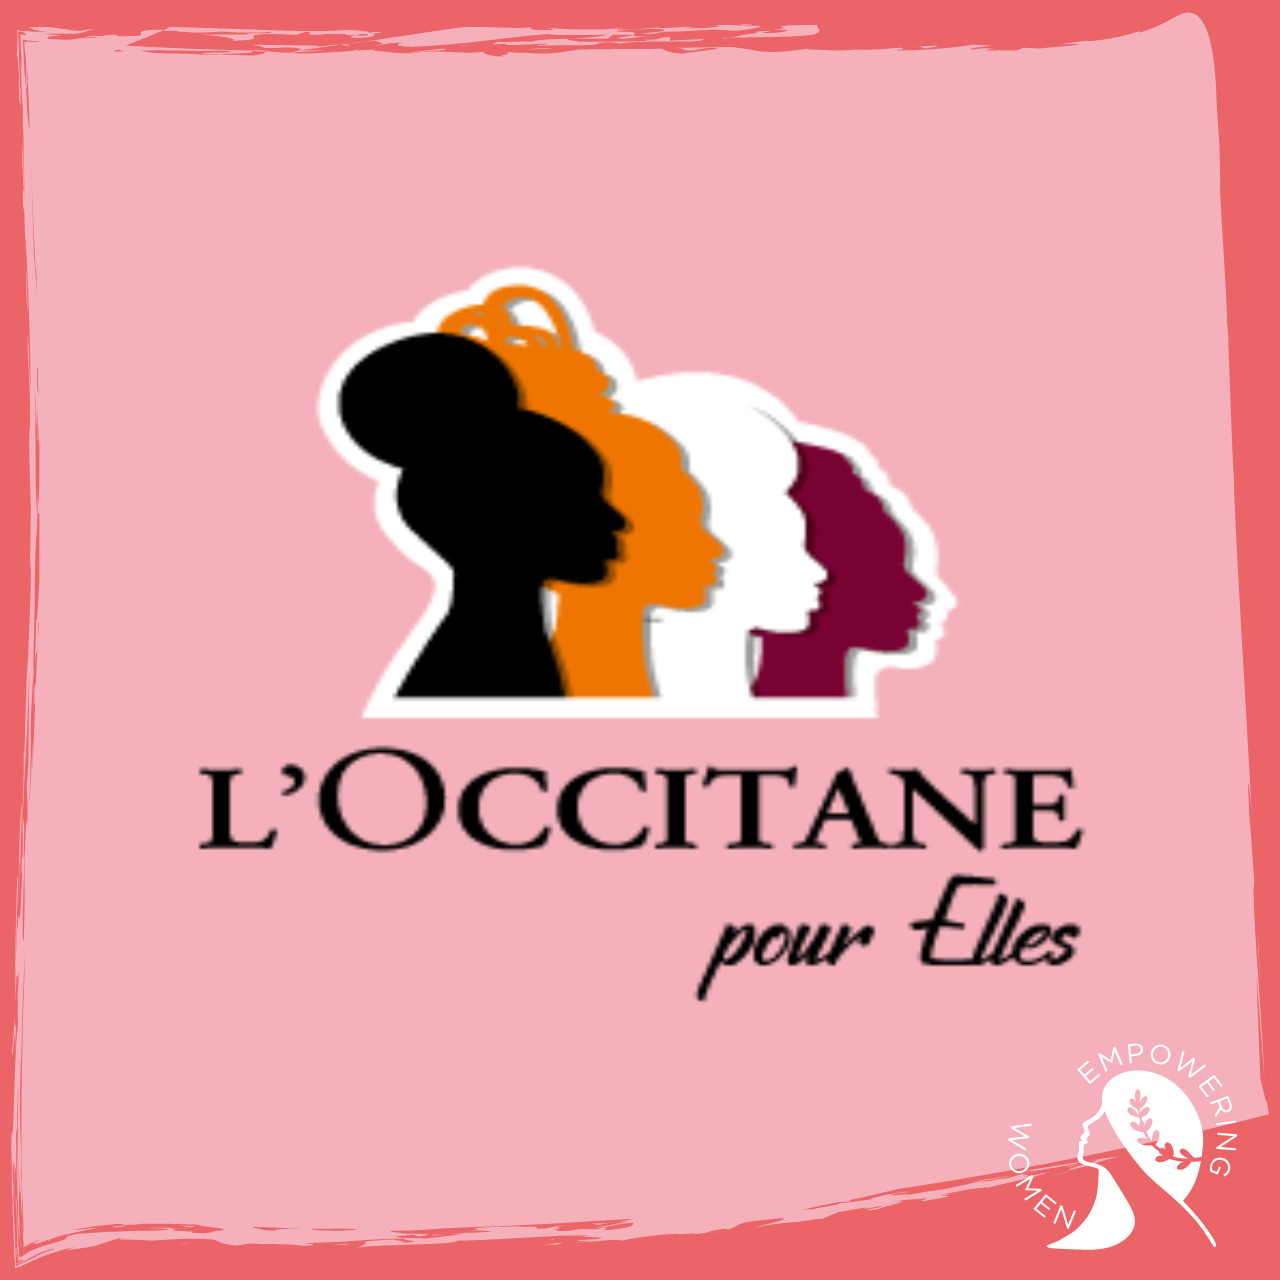 In 2016, the Foundation initiated the L'Occitane pour Elles (L'OpE) program. A program that identifies, through a competition, inspiring and committed women at the head of a company or with a business project and supports them in developing their business. L'OpE, set up by La Fabrique and Initiative France, has already reached 17 companies and more than 1400 women.